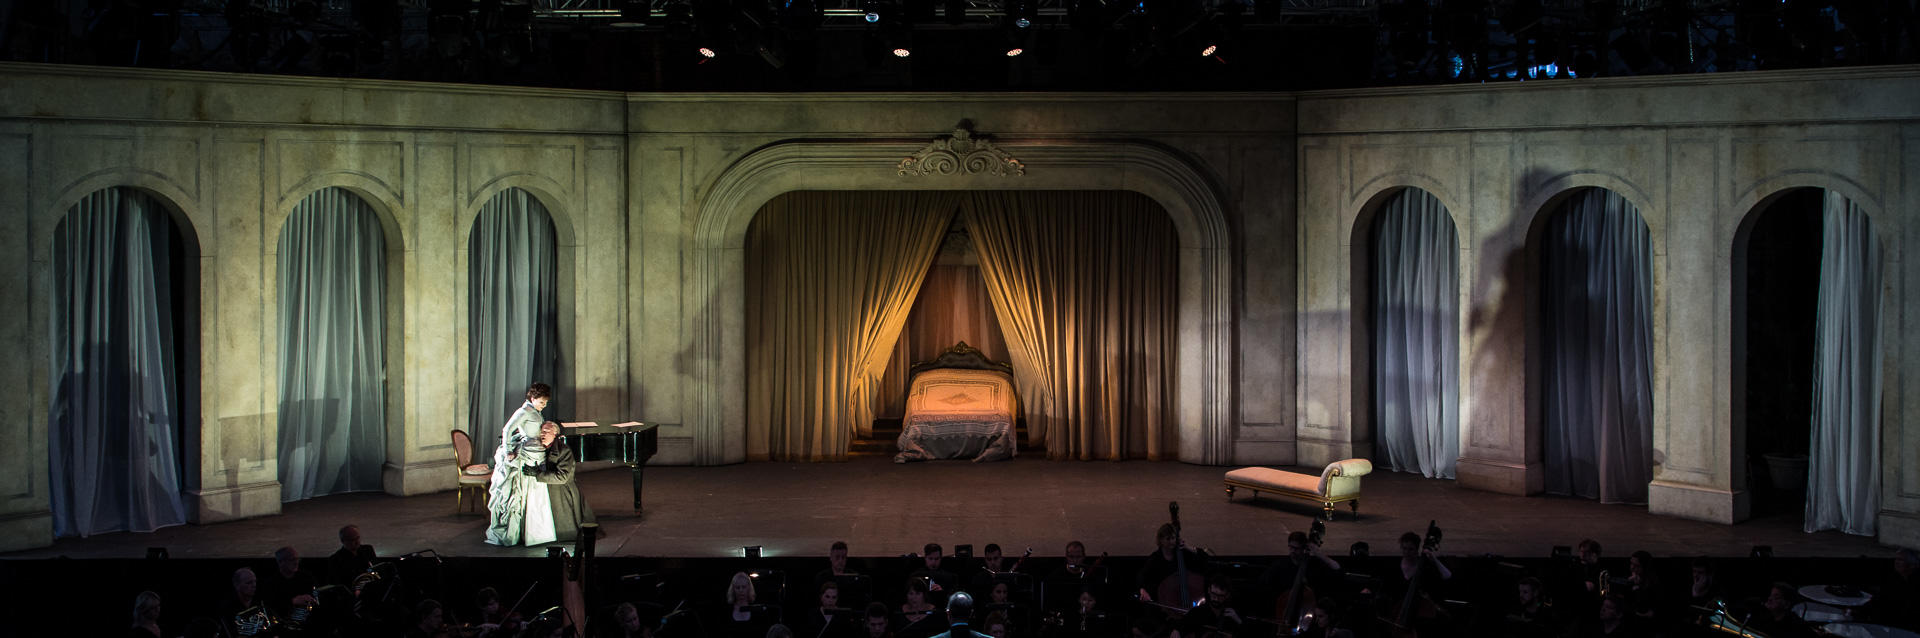 Photograph from The Queen of Spades - lighting design by Simon Corder